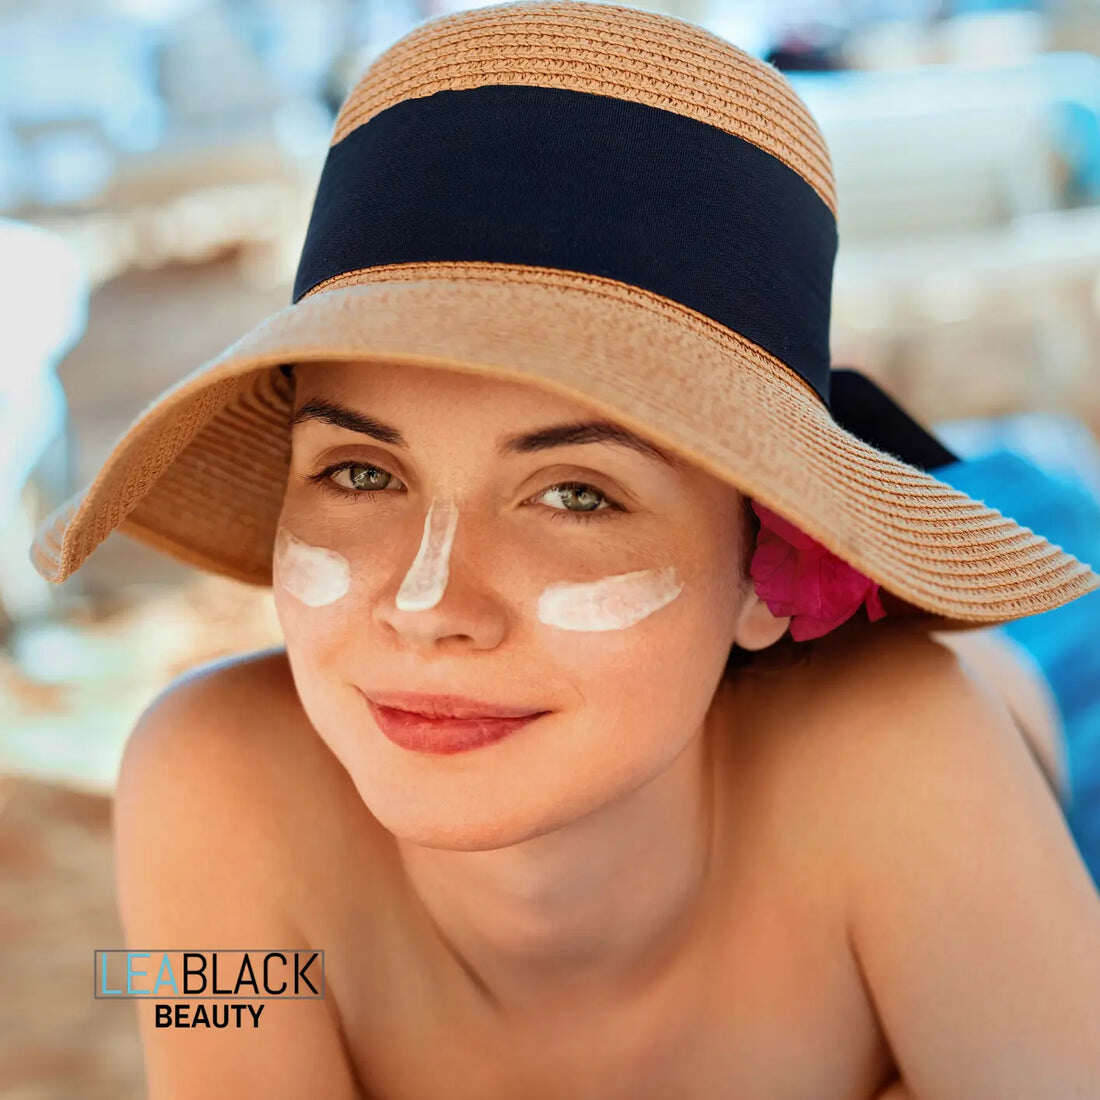 8 Top Beauty Tips For A Hot Guy Or Girl Summer Using Lea Black Beauty®